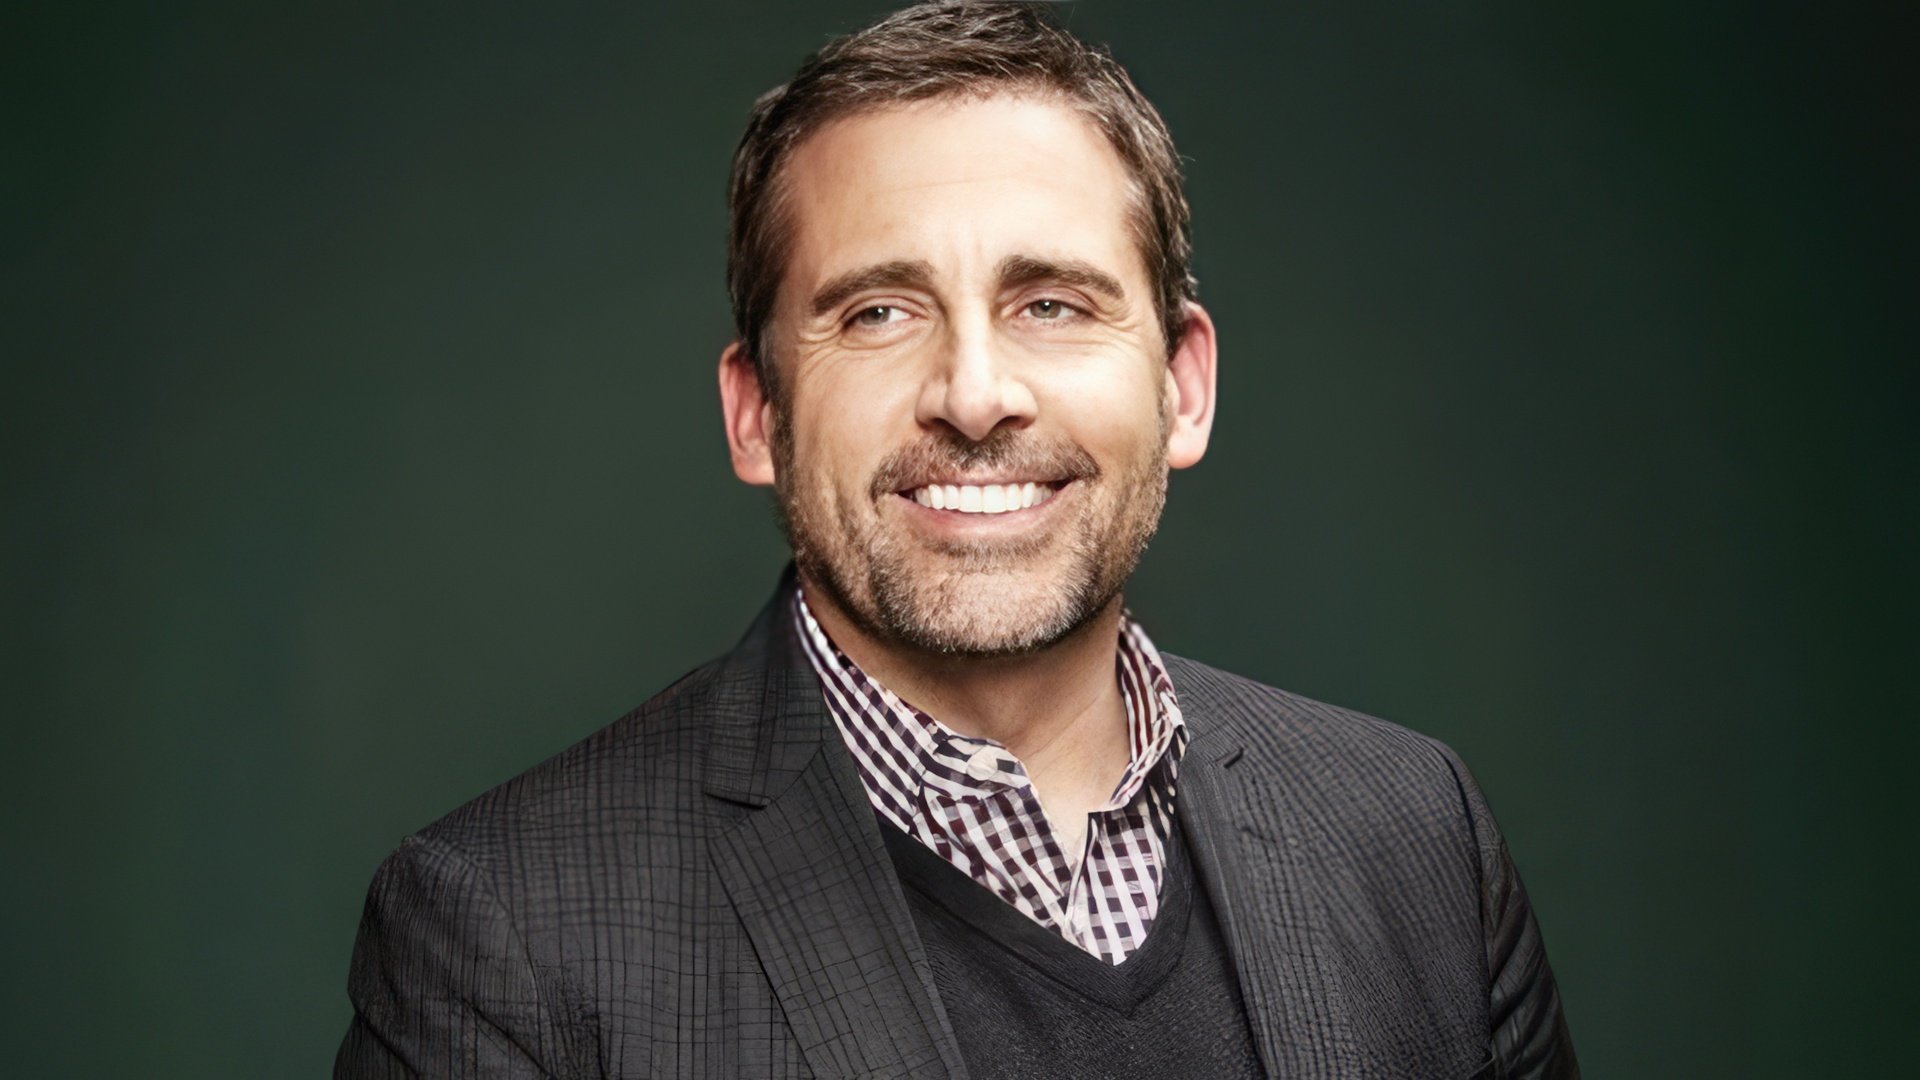 In the photo: Steve Carell